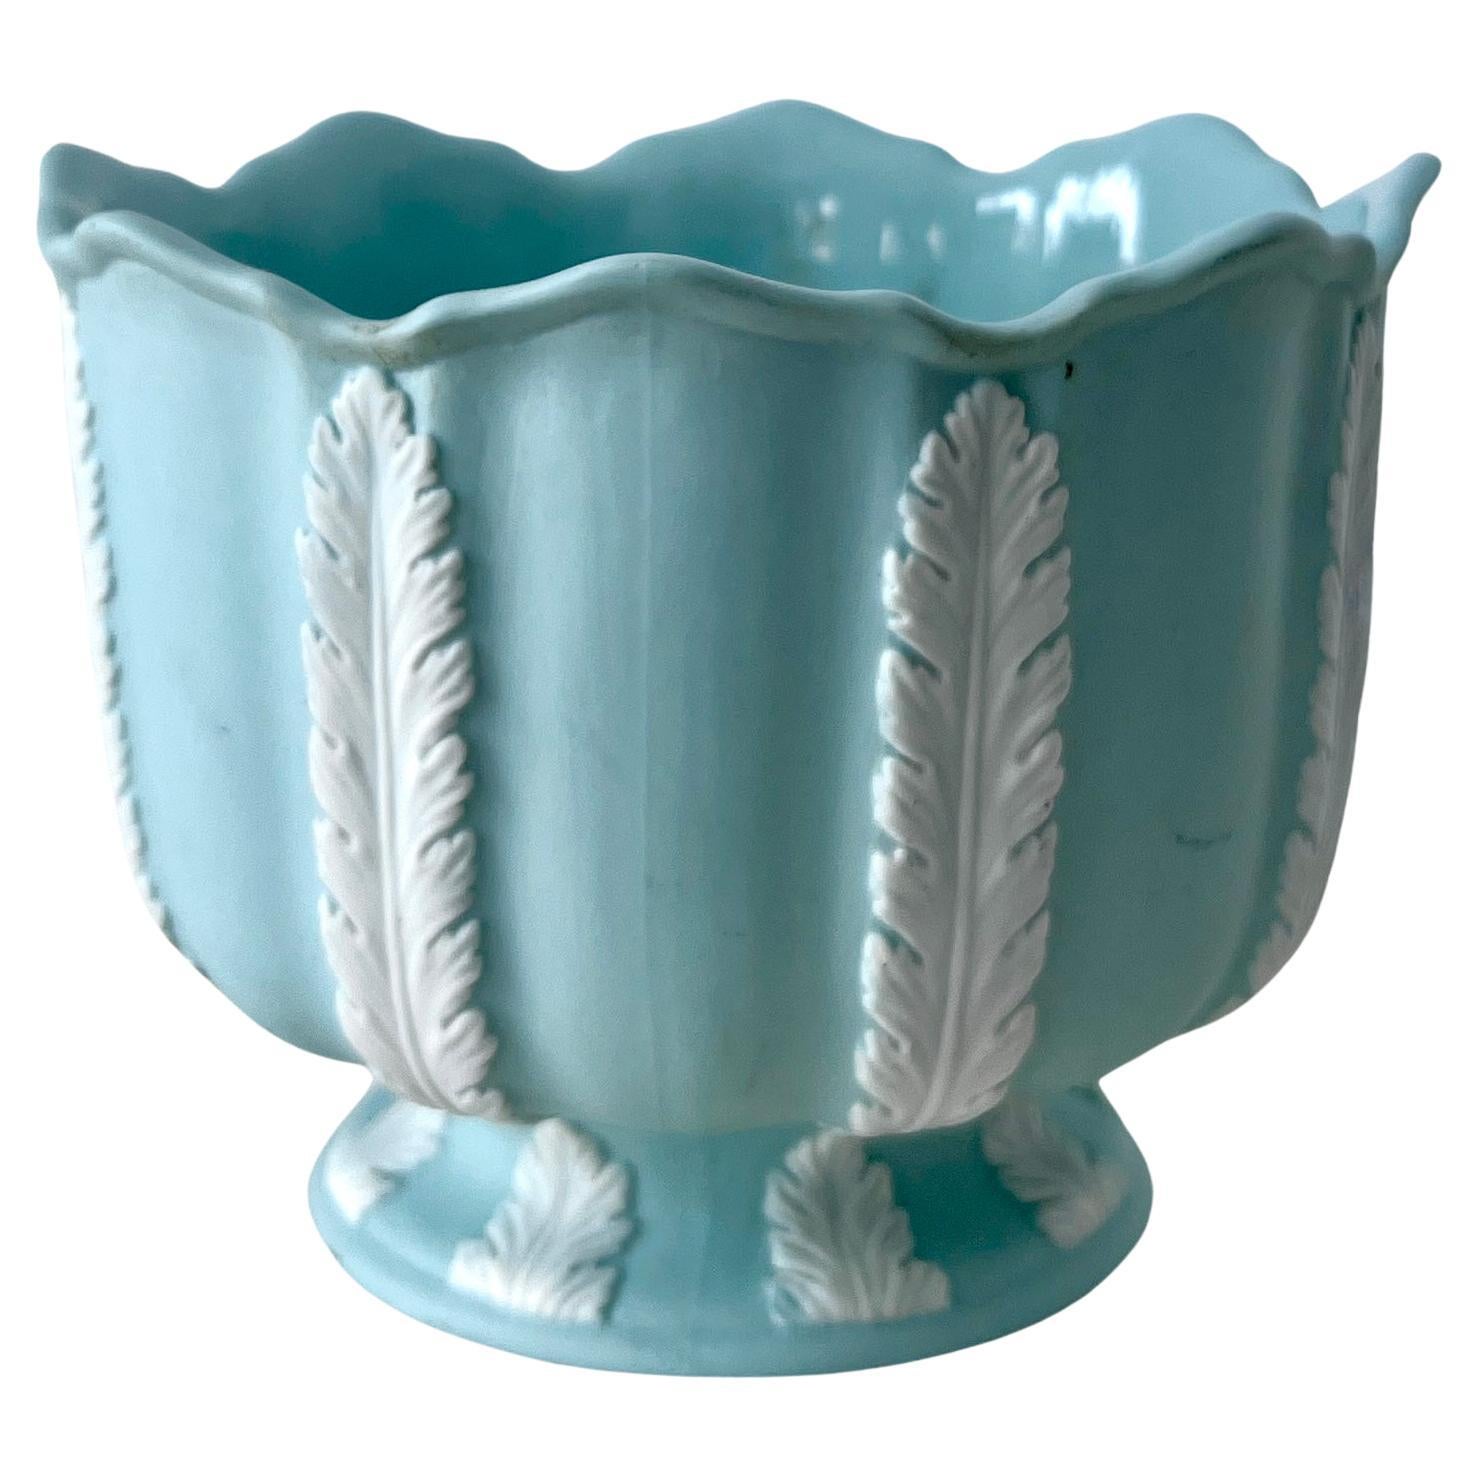 Blue Bisque Planter Bowl with White Leaves For Sale